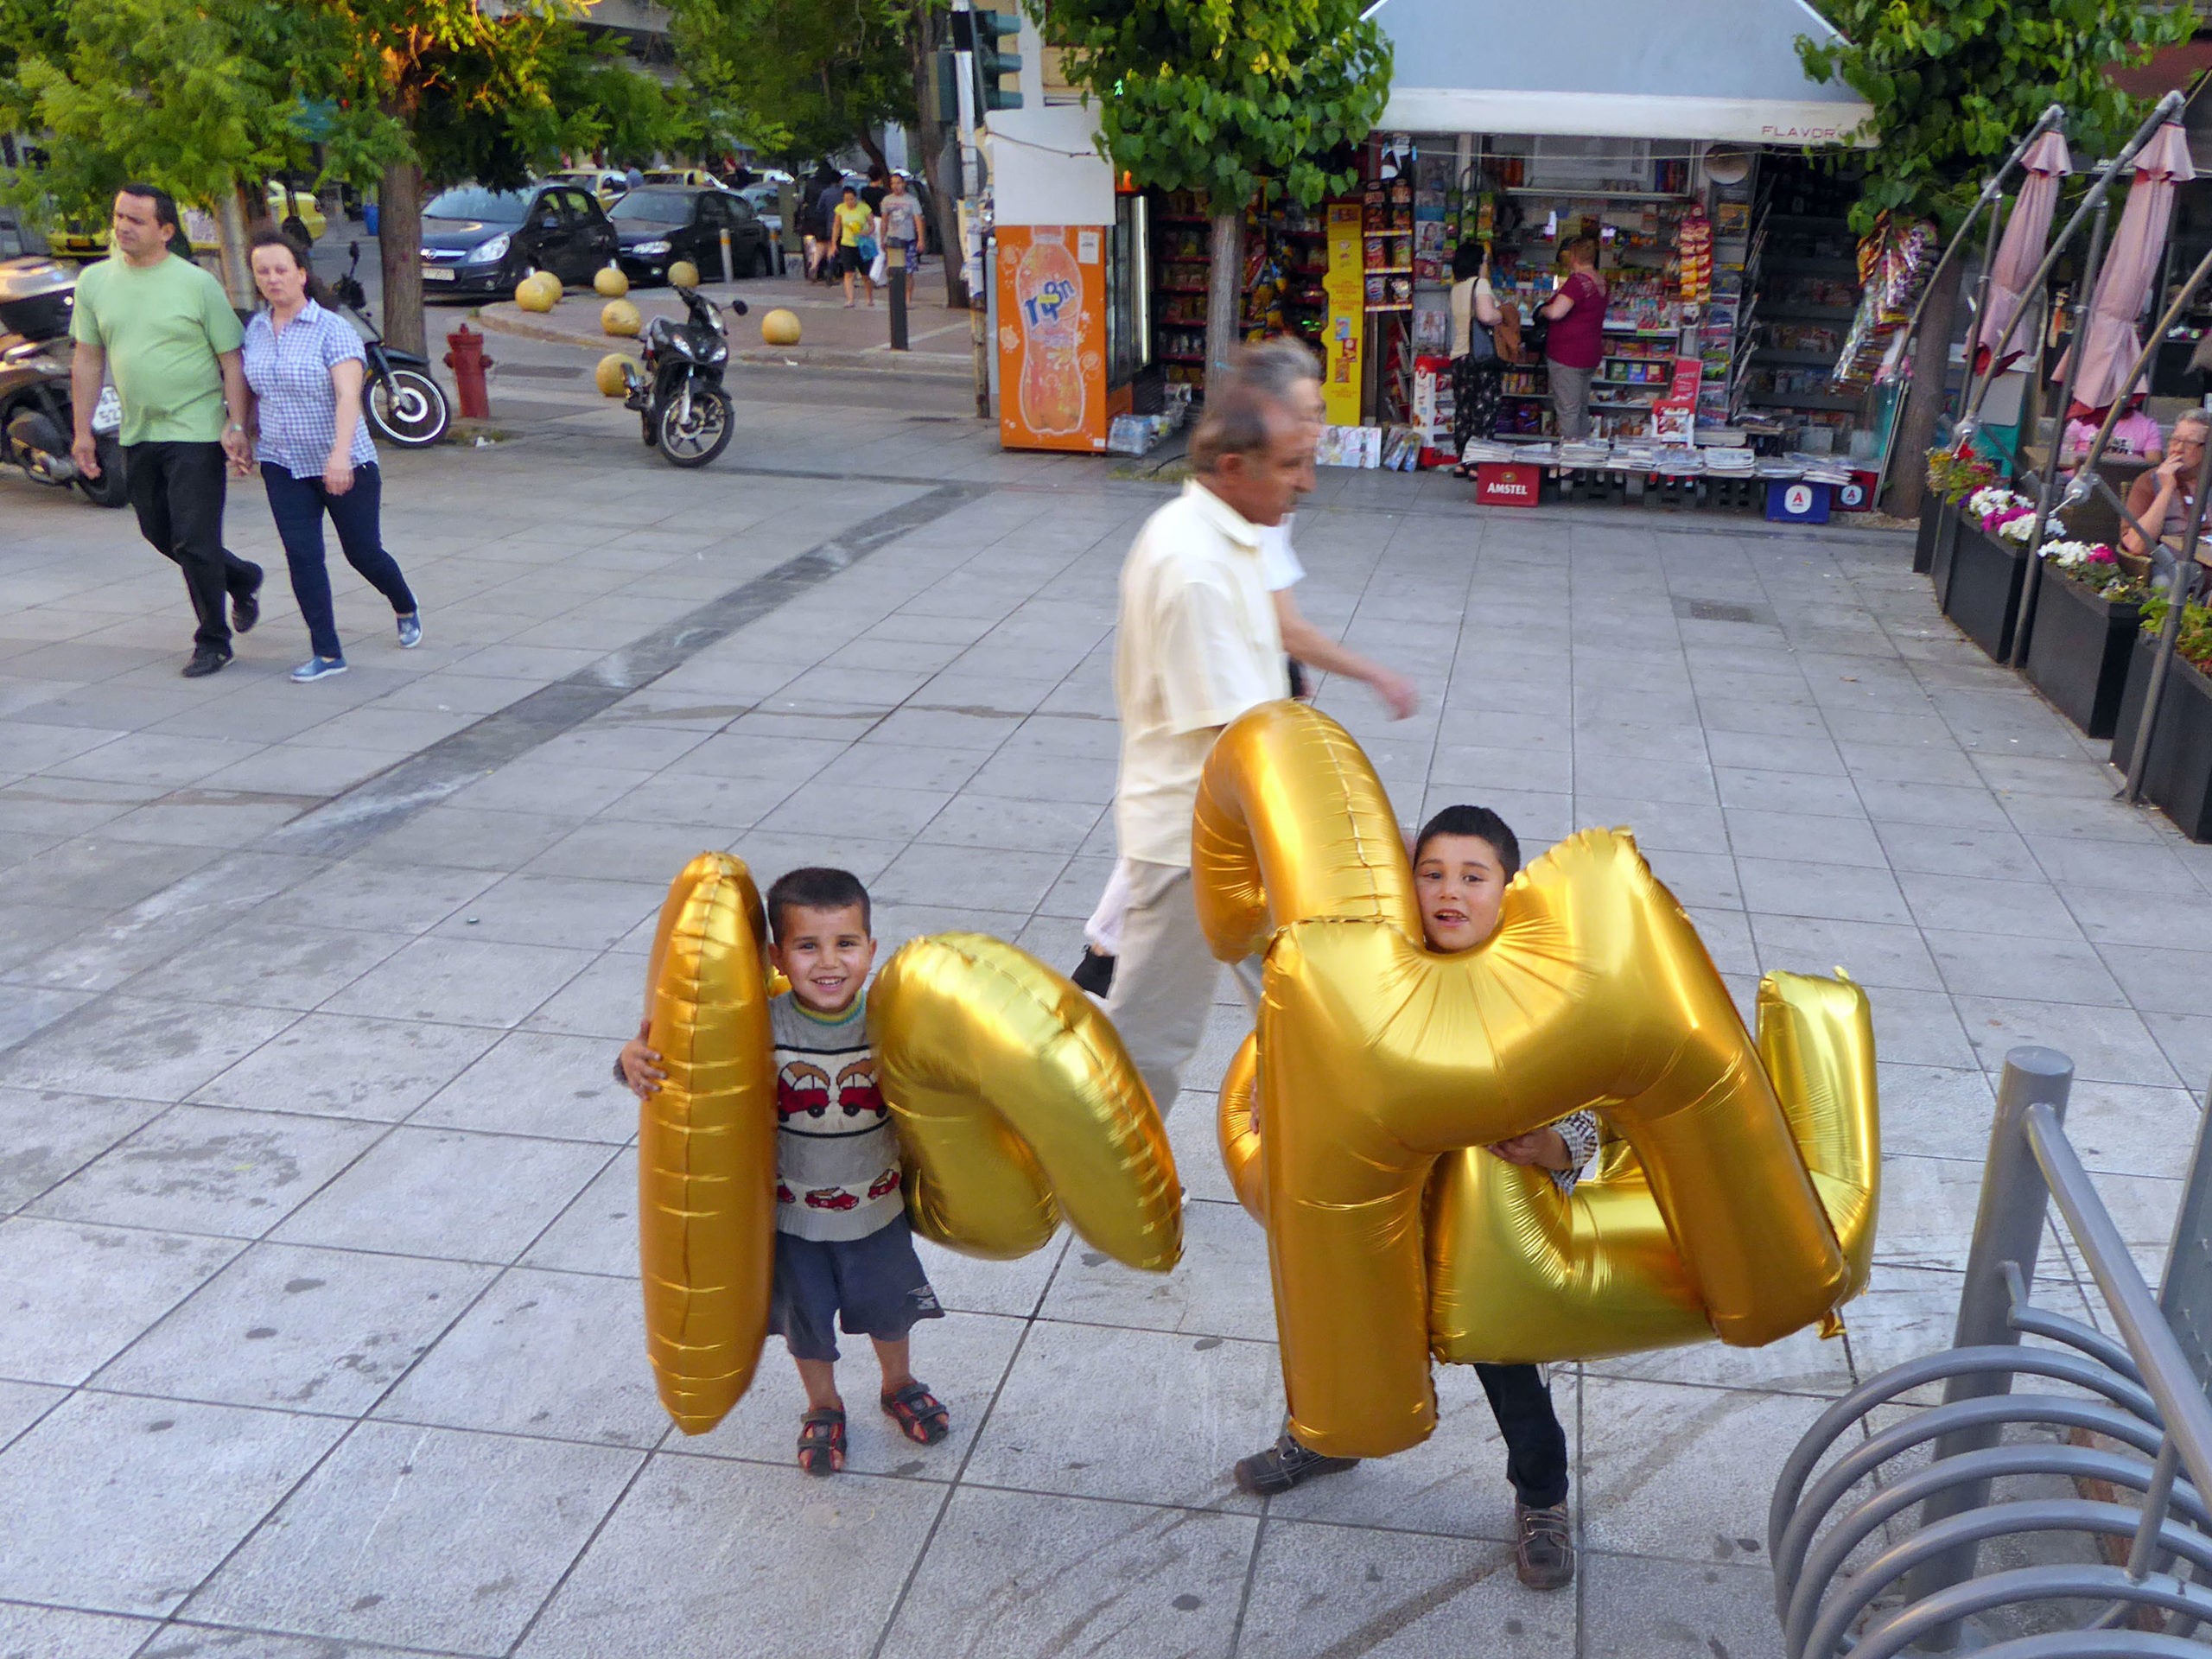 Greece, Athens, Victoria Square - Games #267, Silence Was Golden, gold balloons, workshop